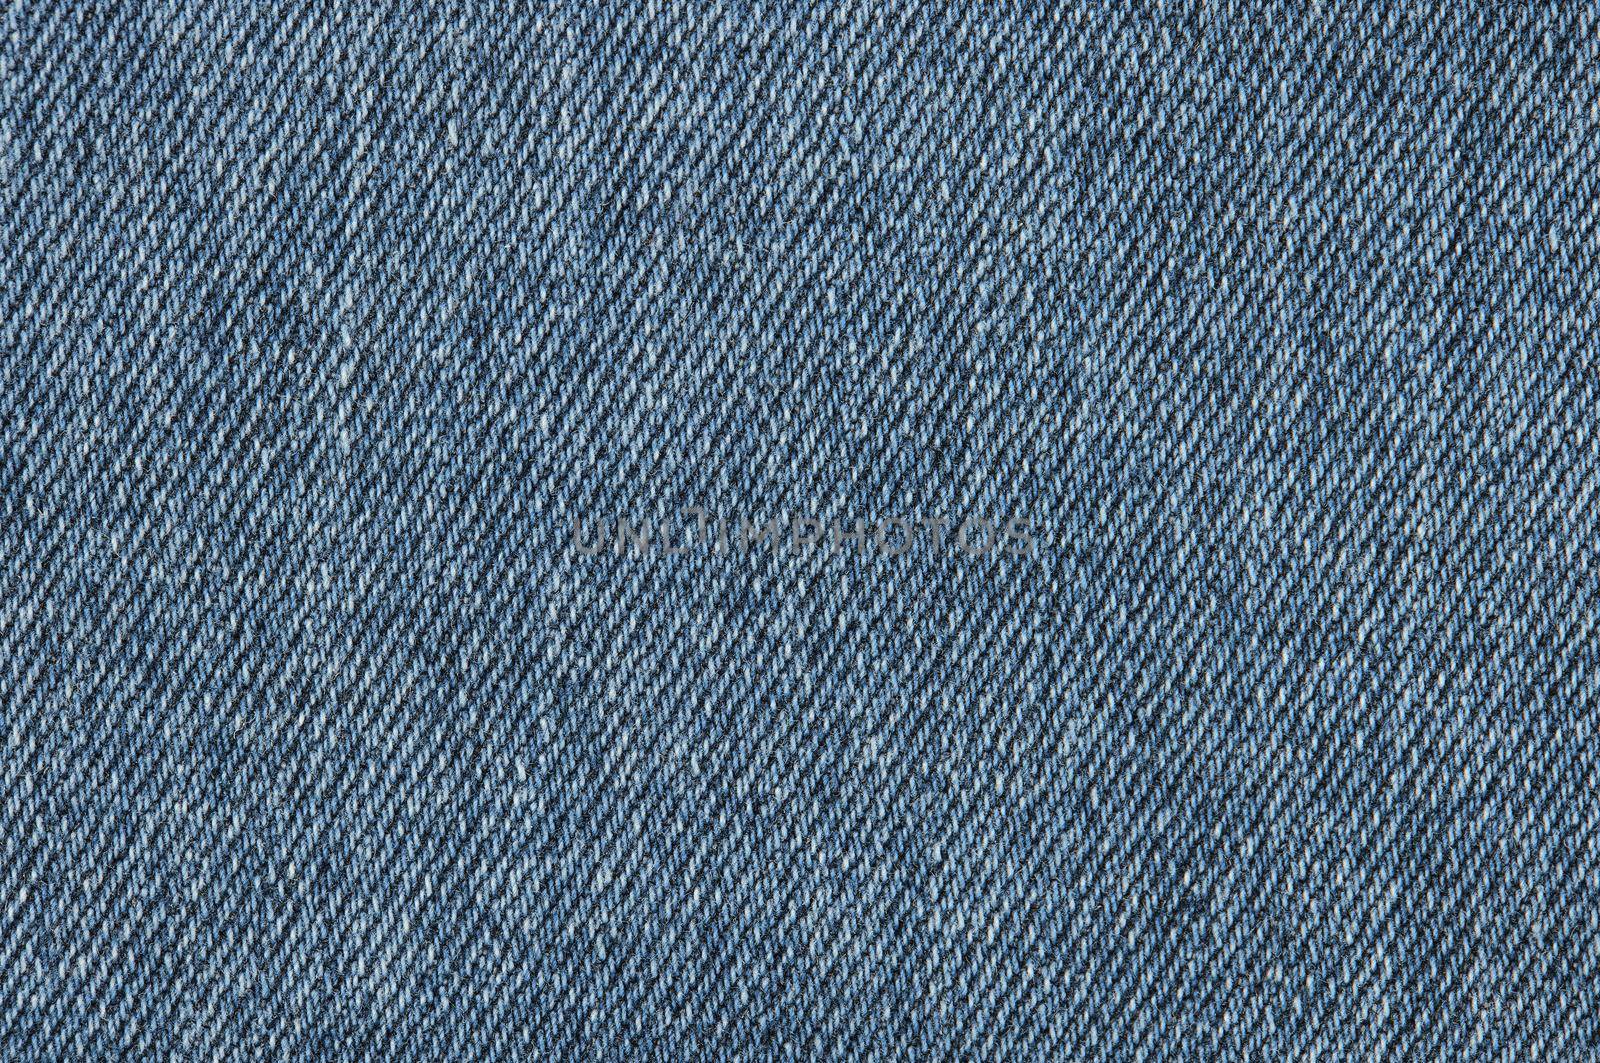 Blue jeans background and texture. Close up of blue jeans background. Denim texture by EvgeniyQW